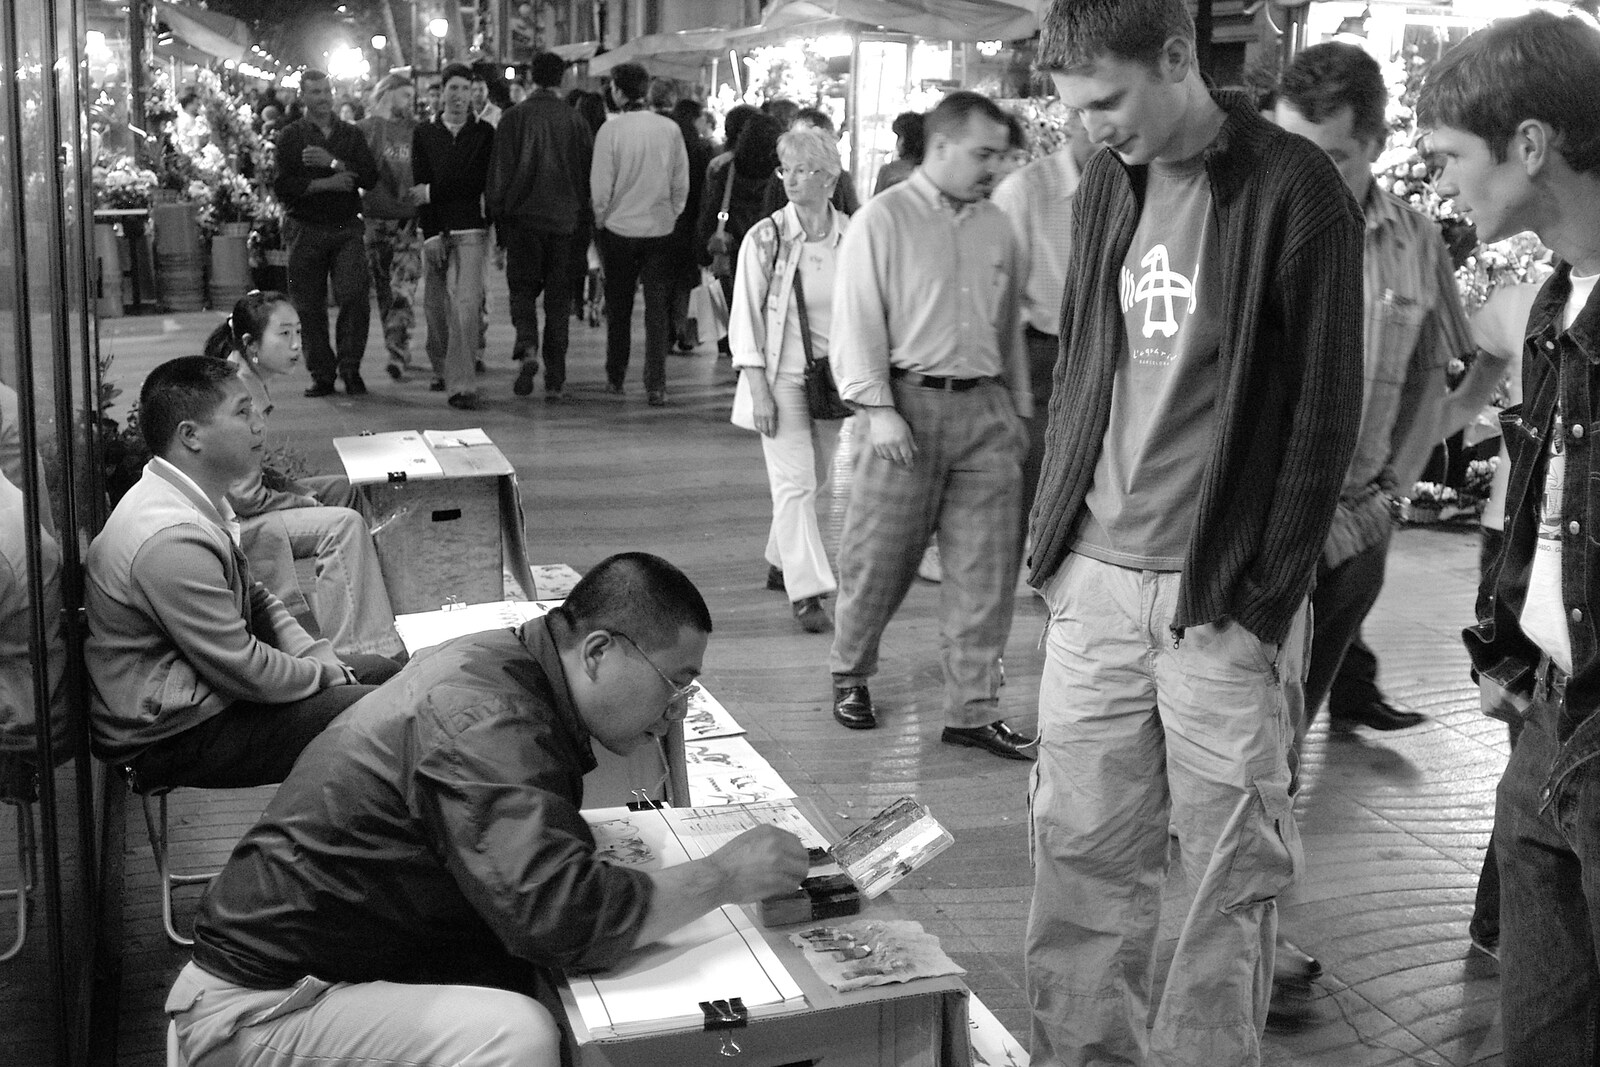 Names get done as Chinese characters from A Trip to Barcelona, Catalunya, Spain - 29th April 2005